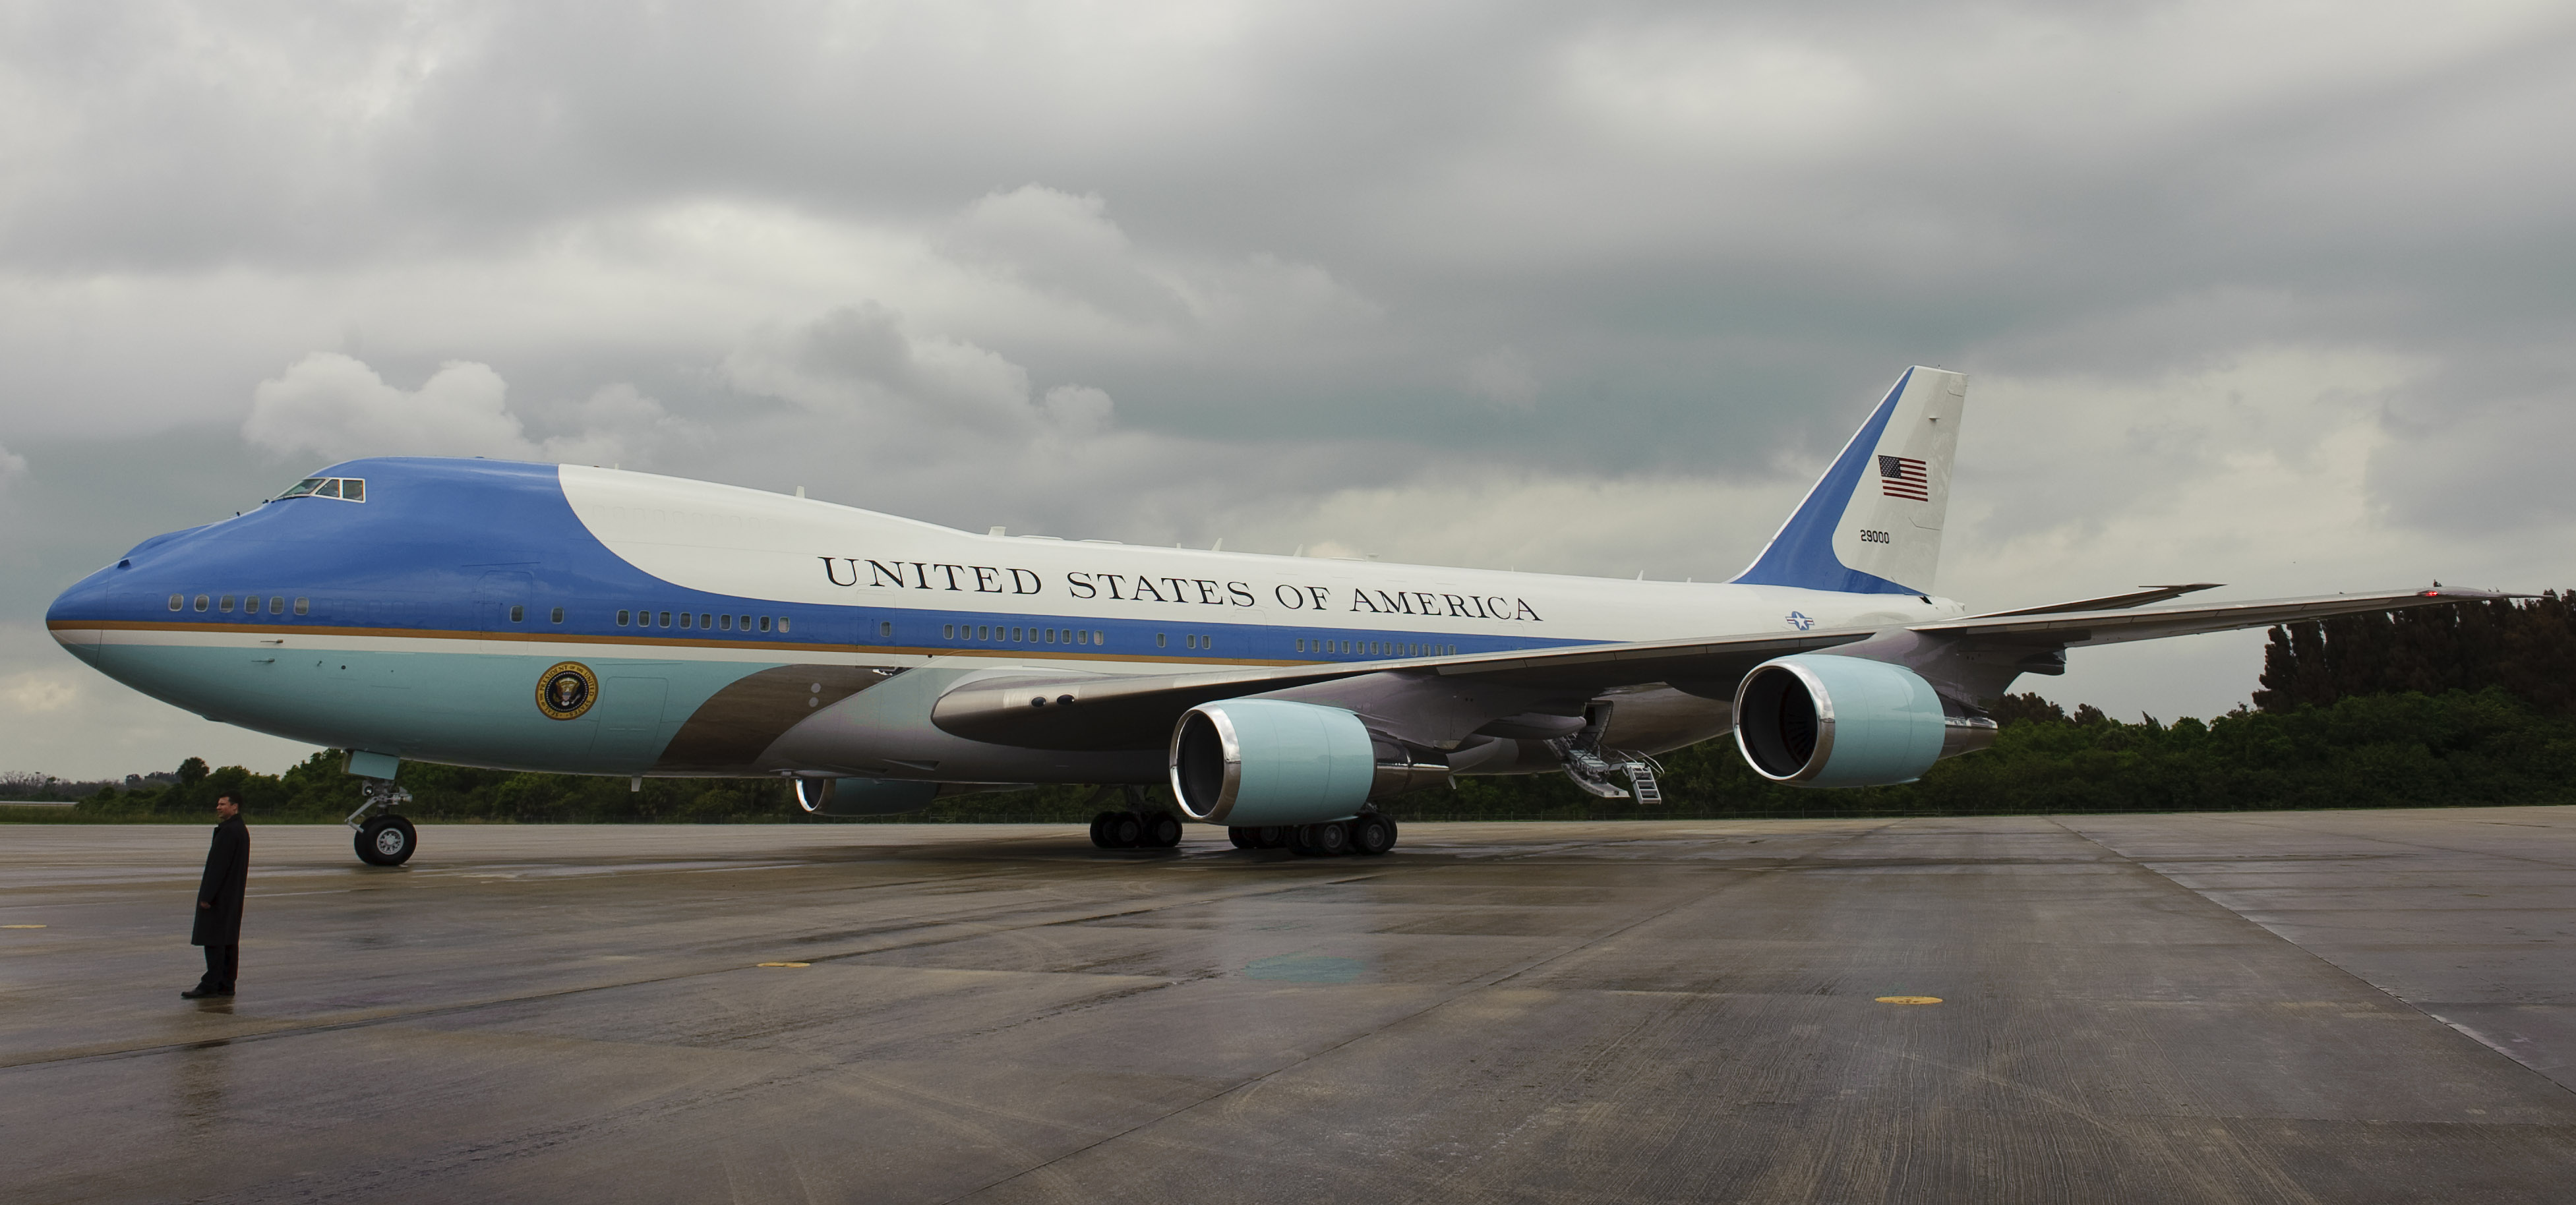 File:VC-25A Air Force One at Kennedy Space Center (2010).jpg ...